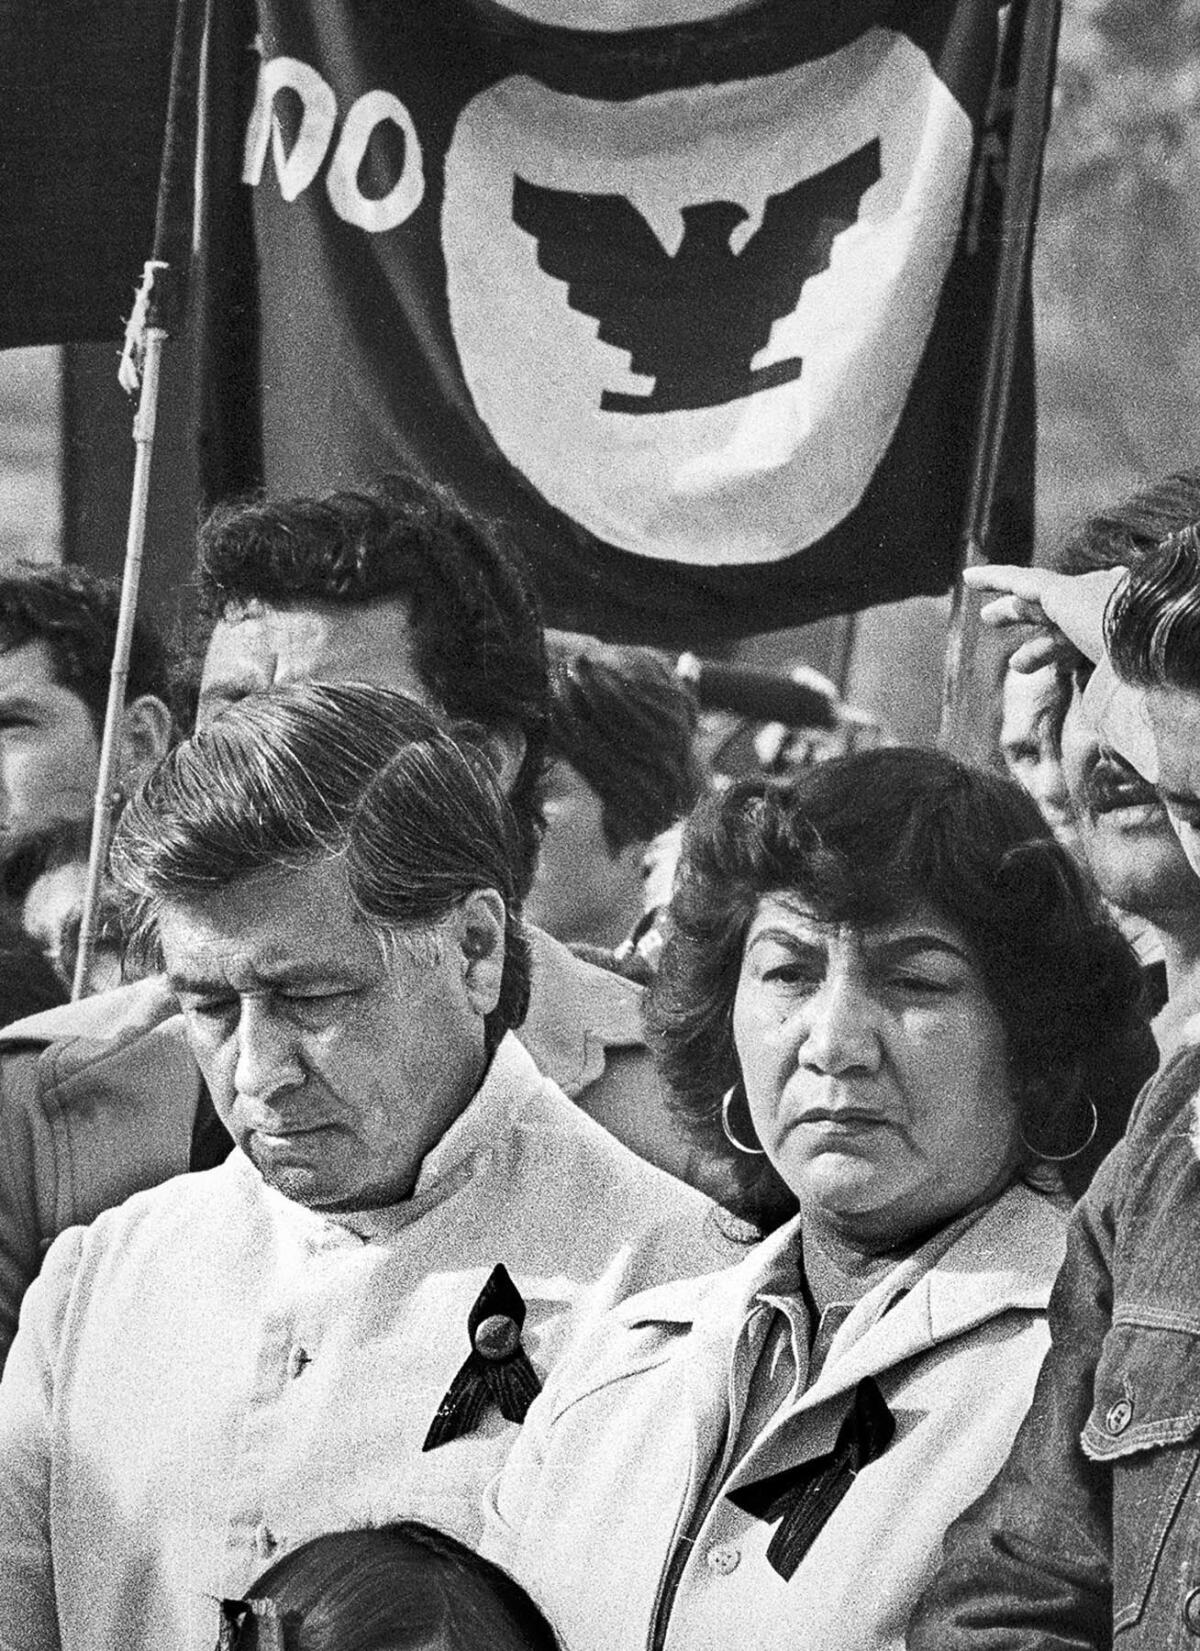 Feb. 14, 1979: UFW President Cesar Chavez and his wife, Helen, at the Calexico graveside service for farmworker Rufino Contreras, who was shot to death in a lettuce field during a bitter strike.